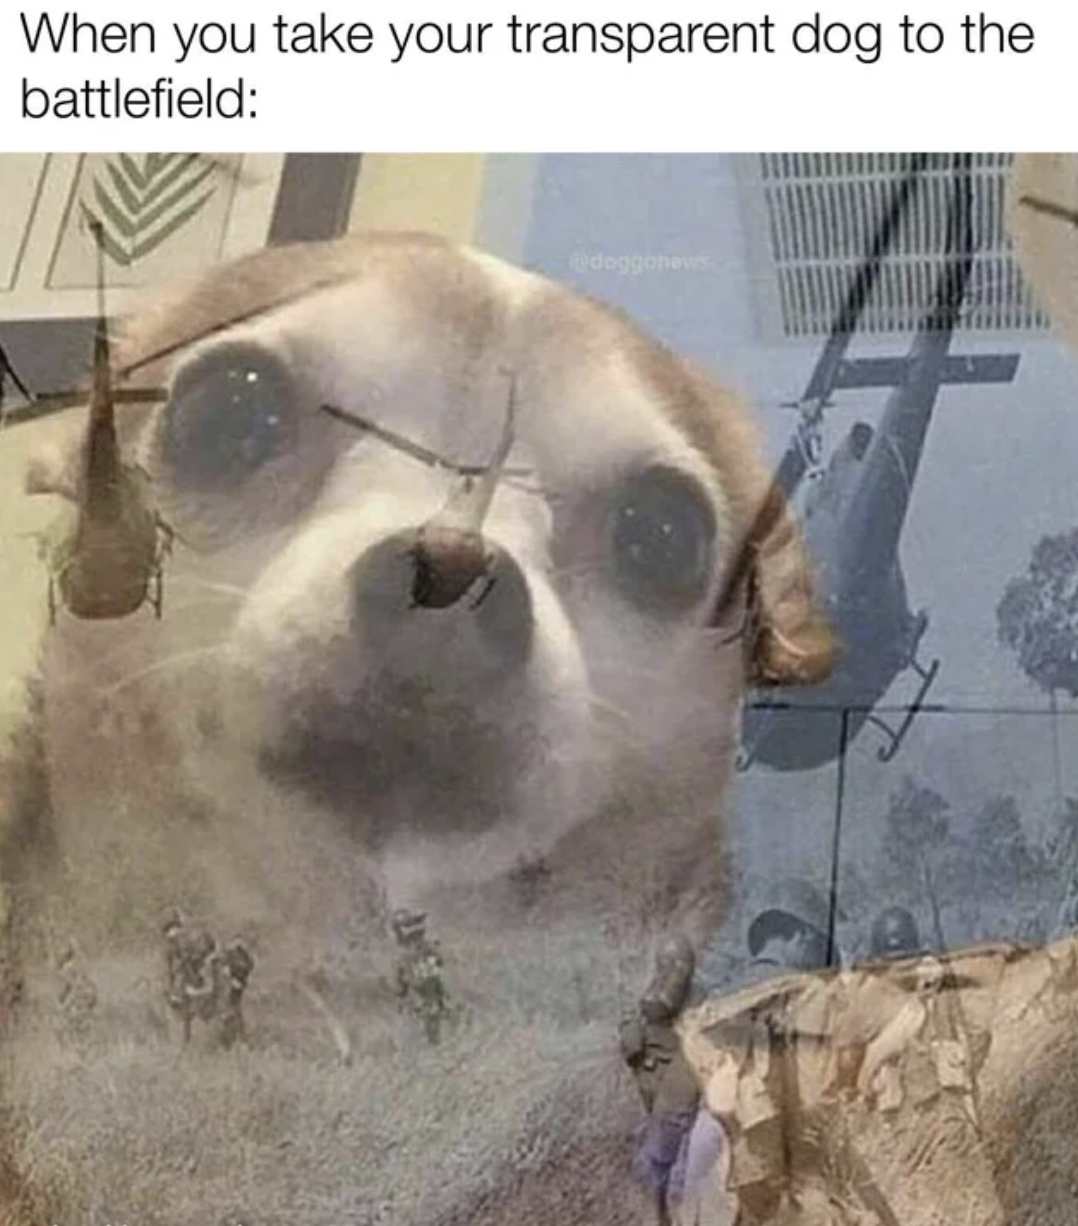 Memes that tell the truth - photo caption - When you take your transparent dog to the battlefield